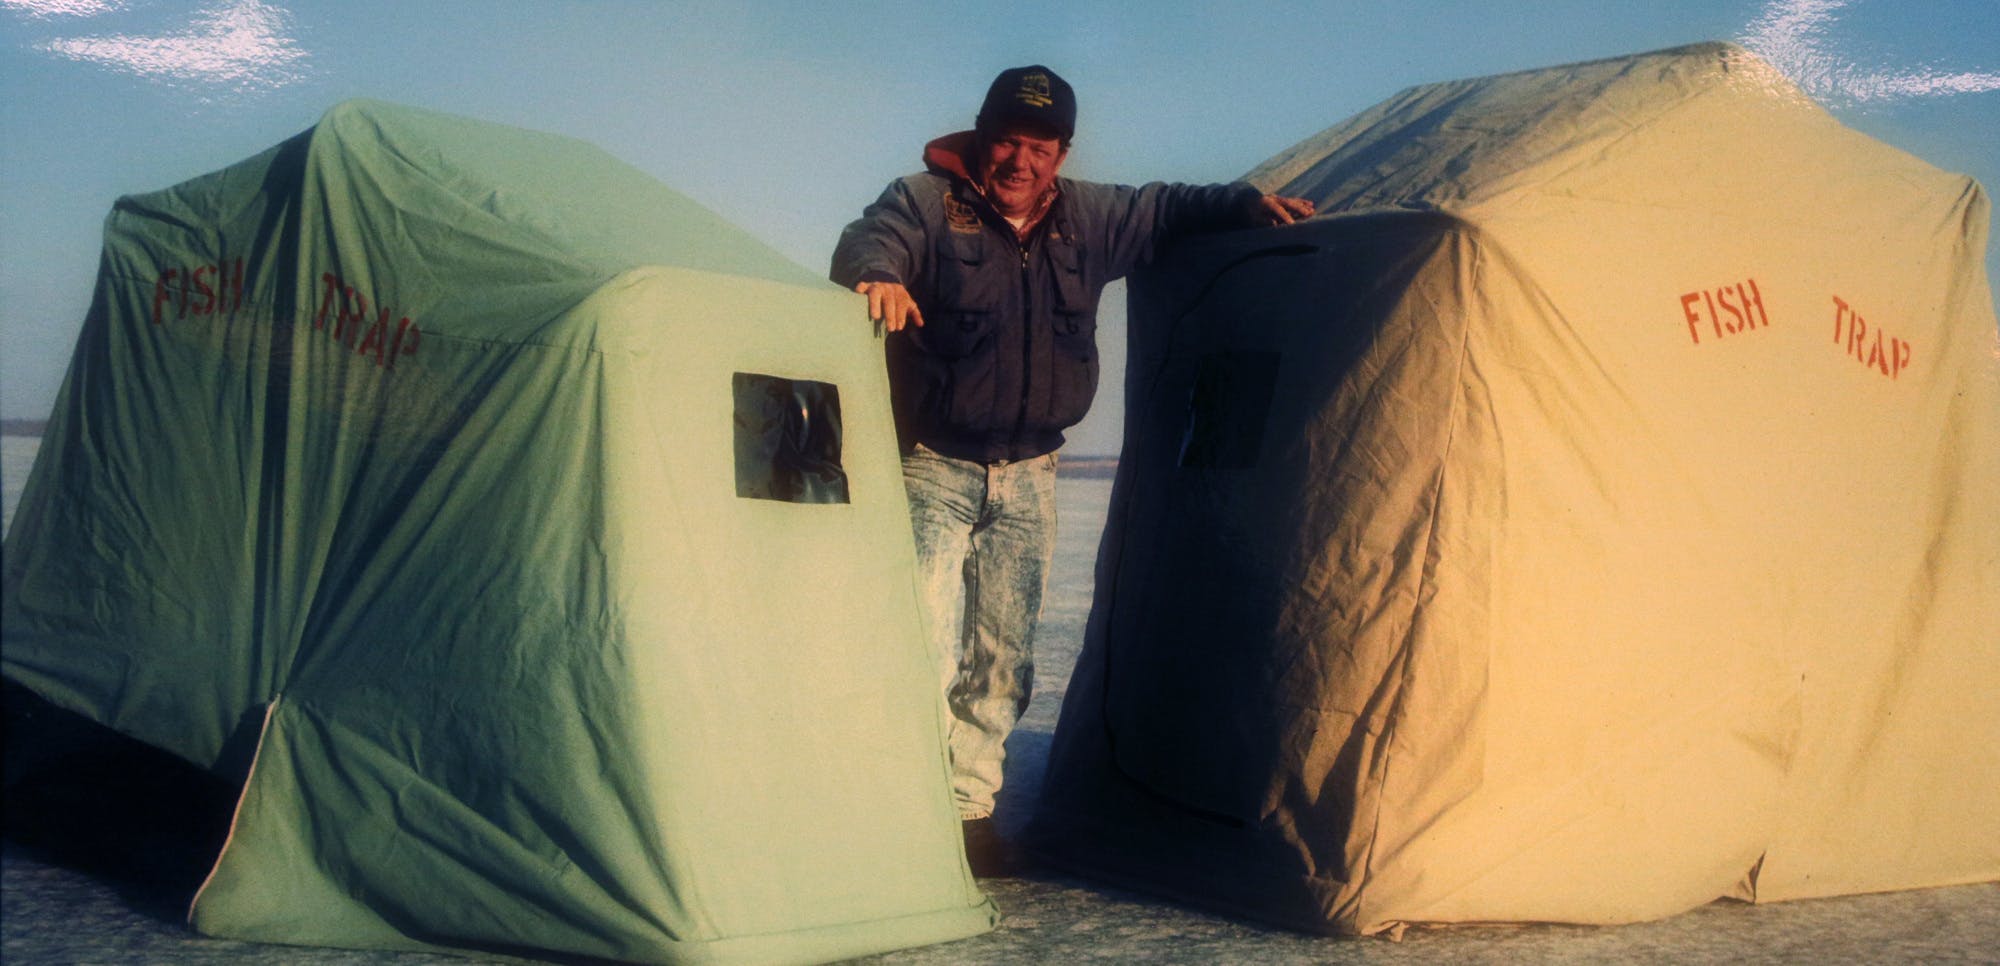 Ice Fishing Shelters for sale in Aitkin County, Minnesota, Facebook  Marketplace